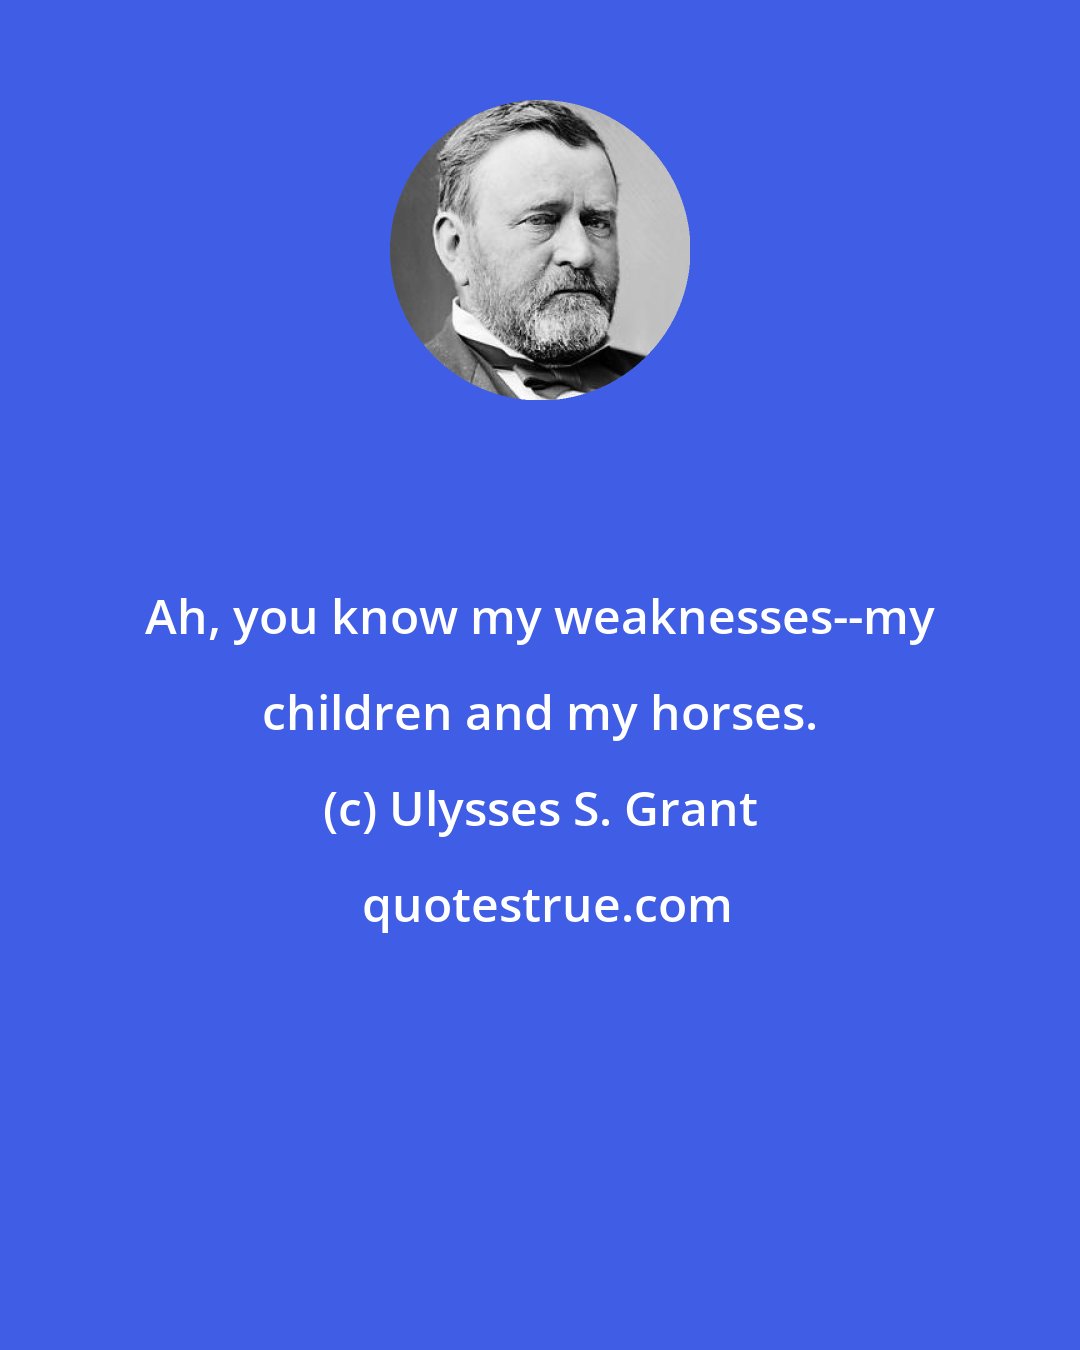 Ulysses S. Grant: Ah, you know my weaknesses--my children and my horses.